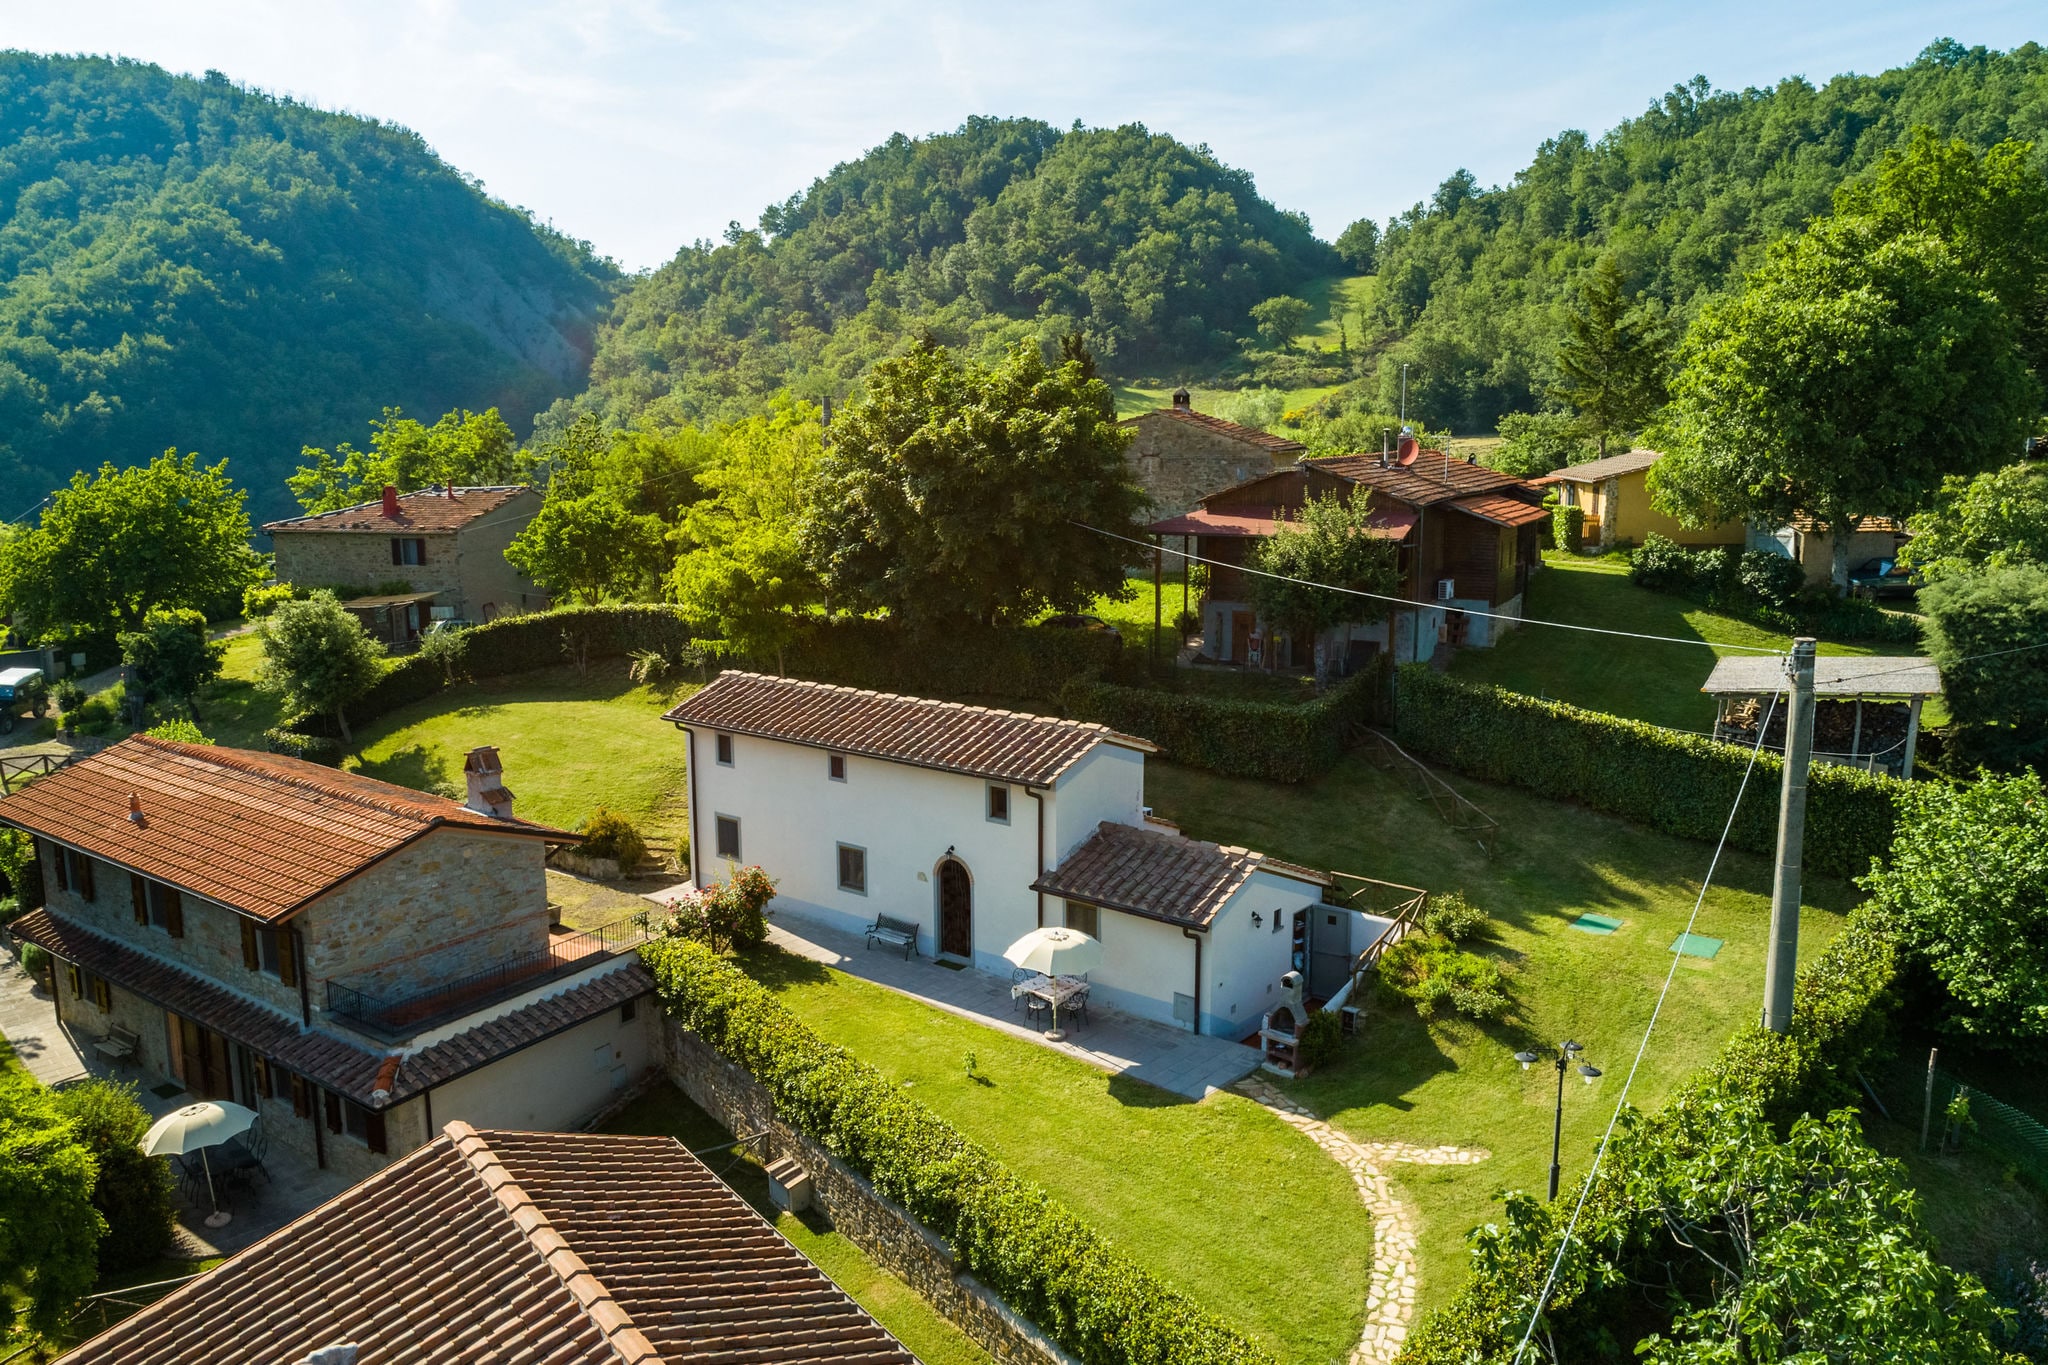 These pleasant, detached cottages are north of Florence.